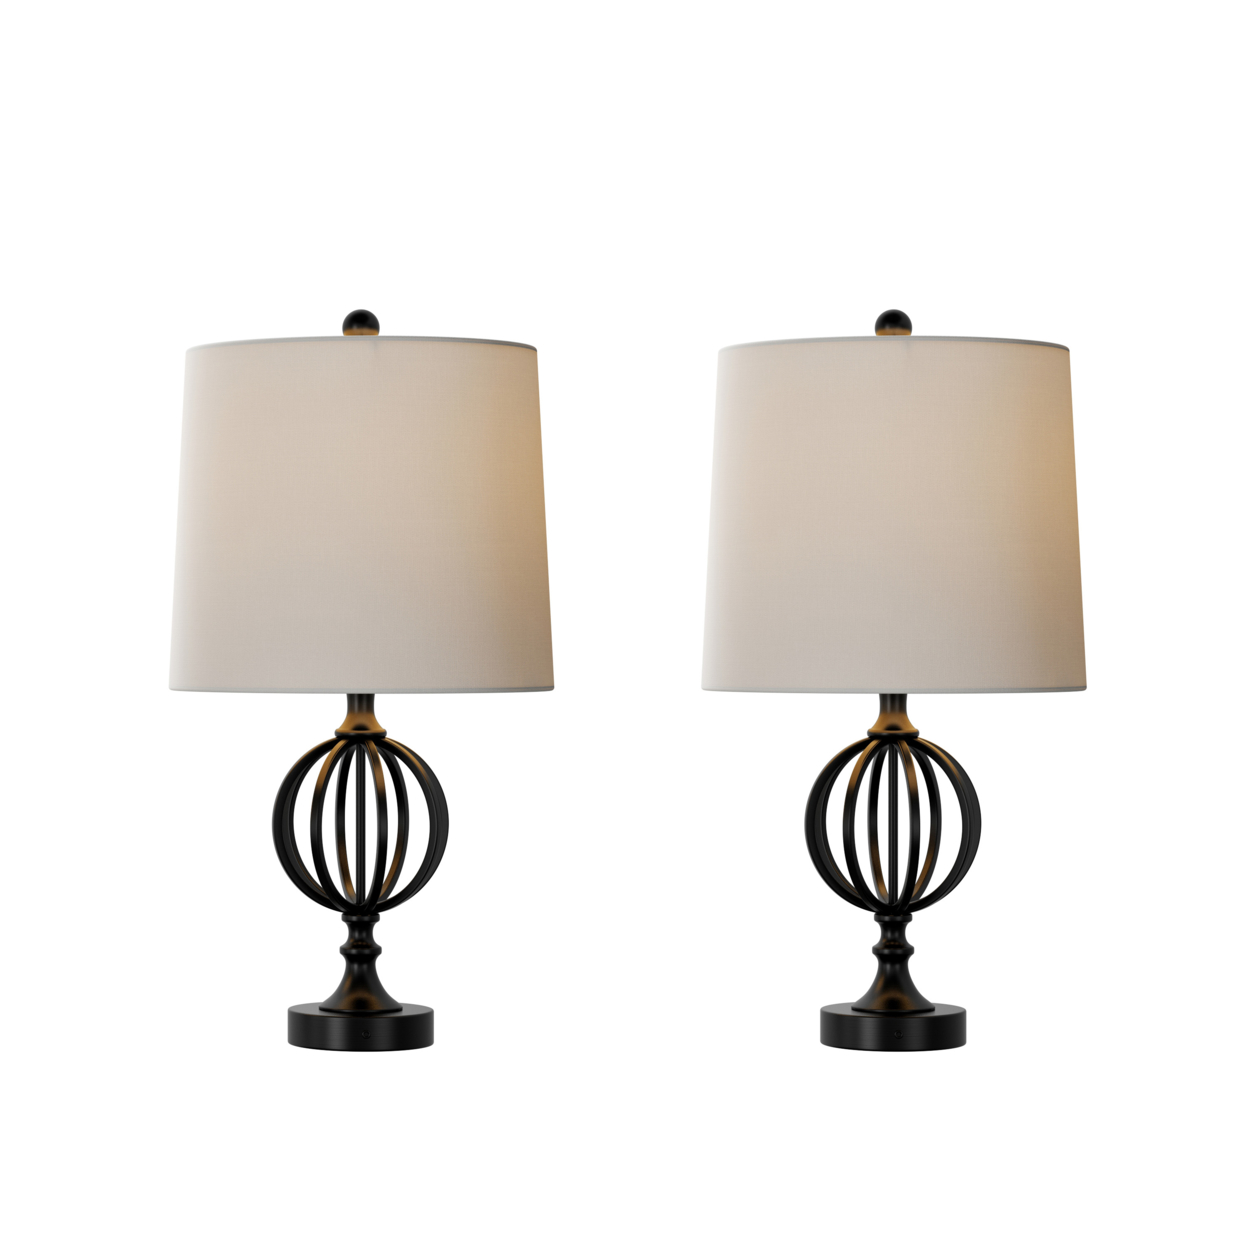 Table Lamps- Set Of 2 Openwork Iron Orb Lights, Bulbs And Shades Included-Modern Rustic Style Perfect Accent Pieces